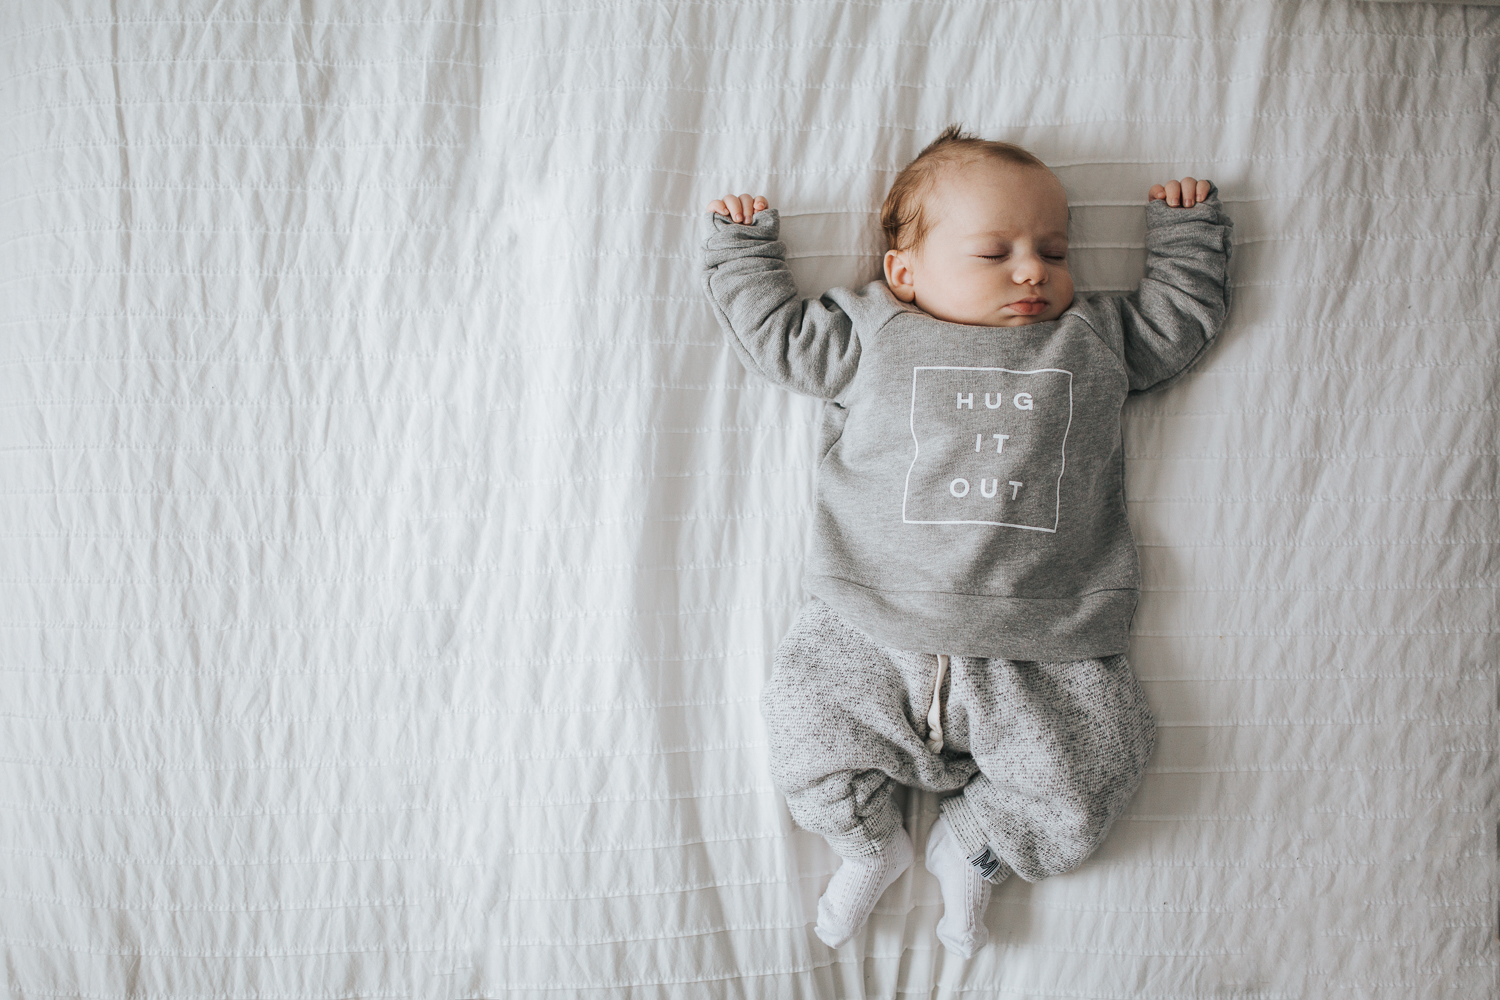 2 month old baby boy lying on bed {Toronto Family Photographer}